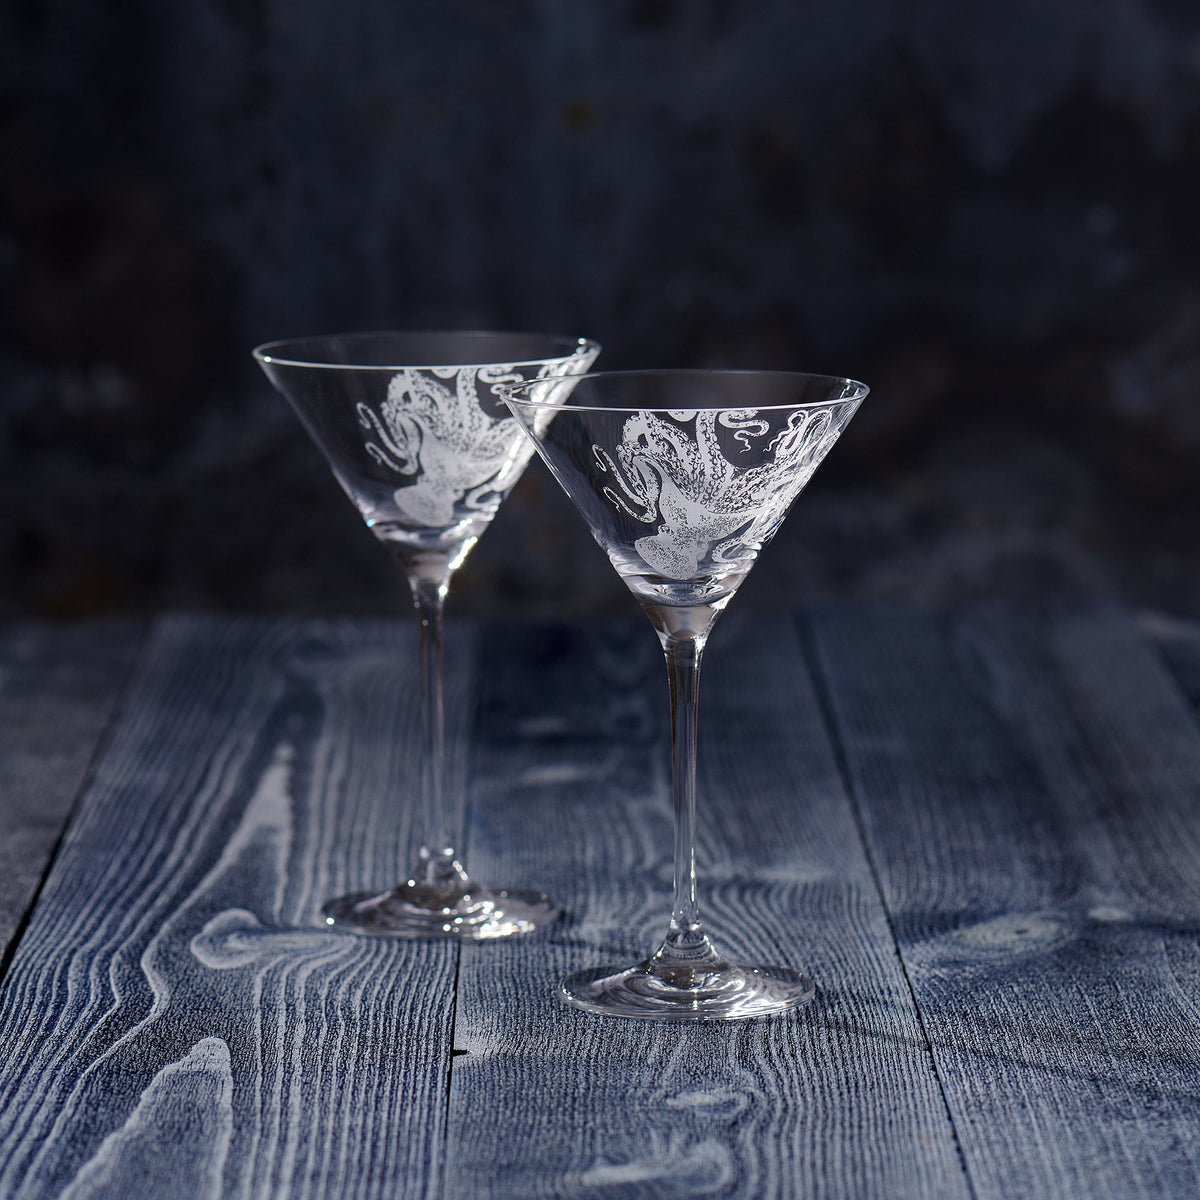 Two Lucy Martini Glasses by Caskata Artisanal Home on a wooden table.